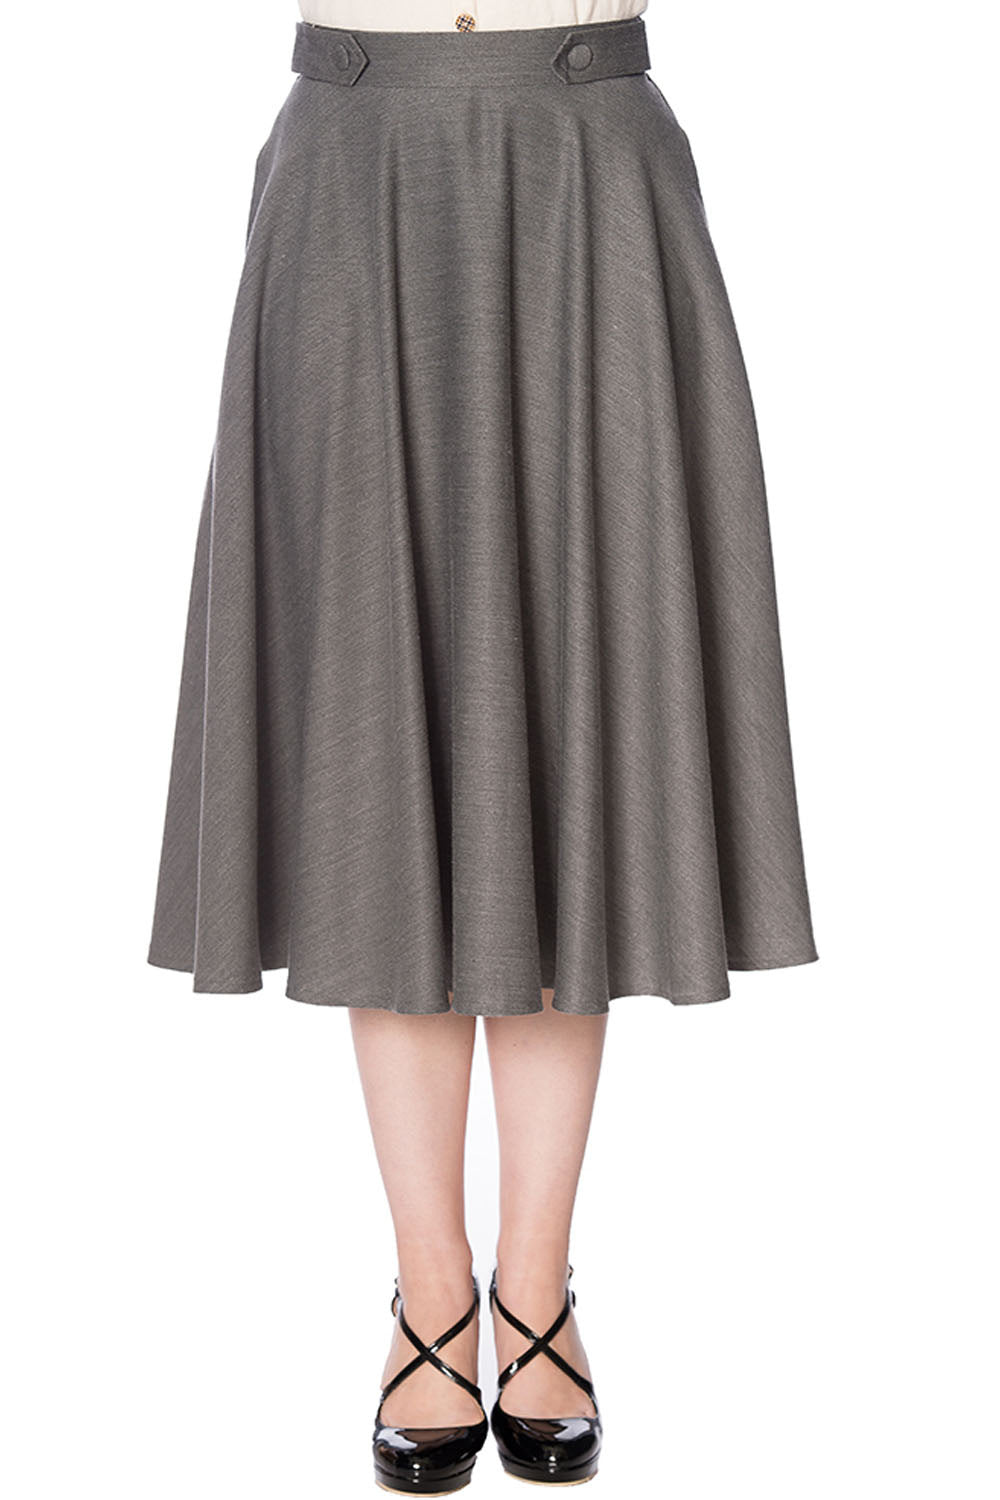 Di Di 50s Swing Skirt in Grey by Banned Retro